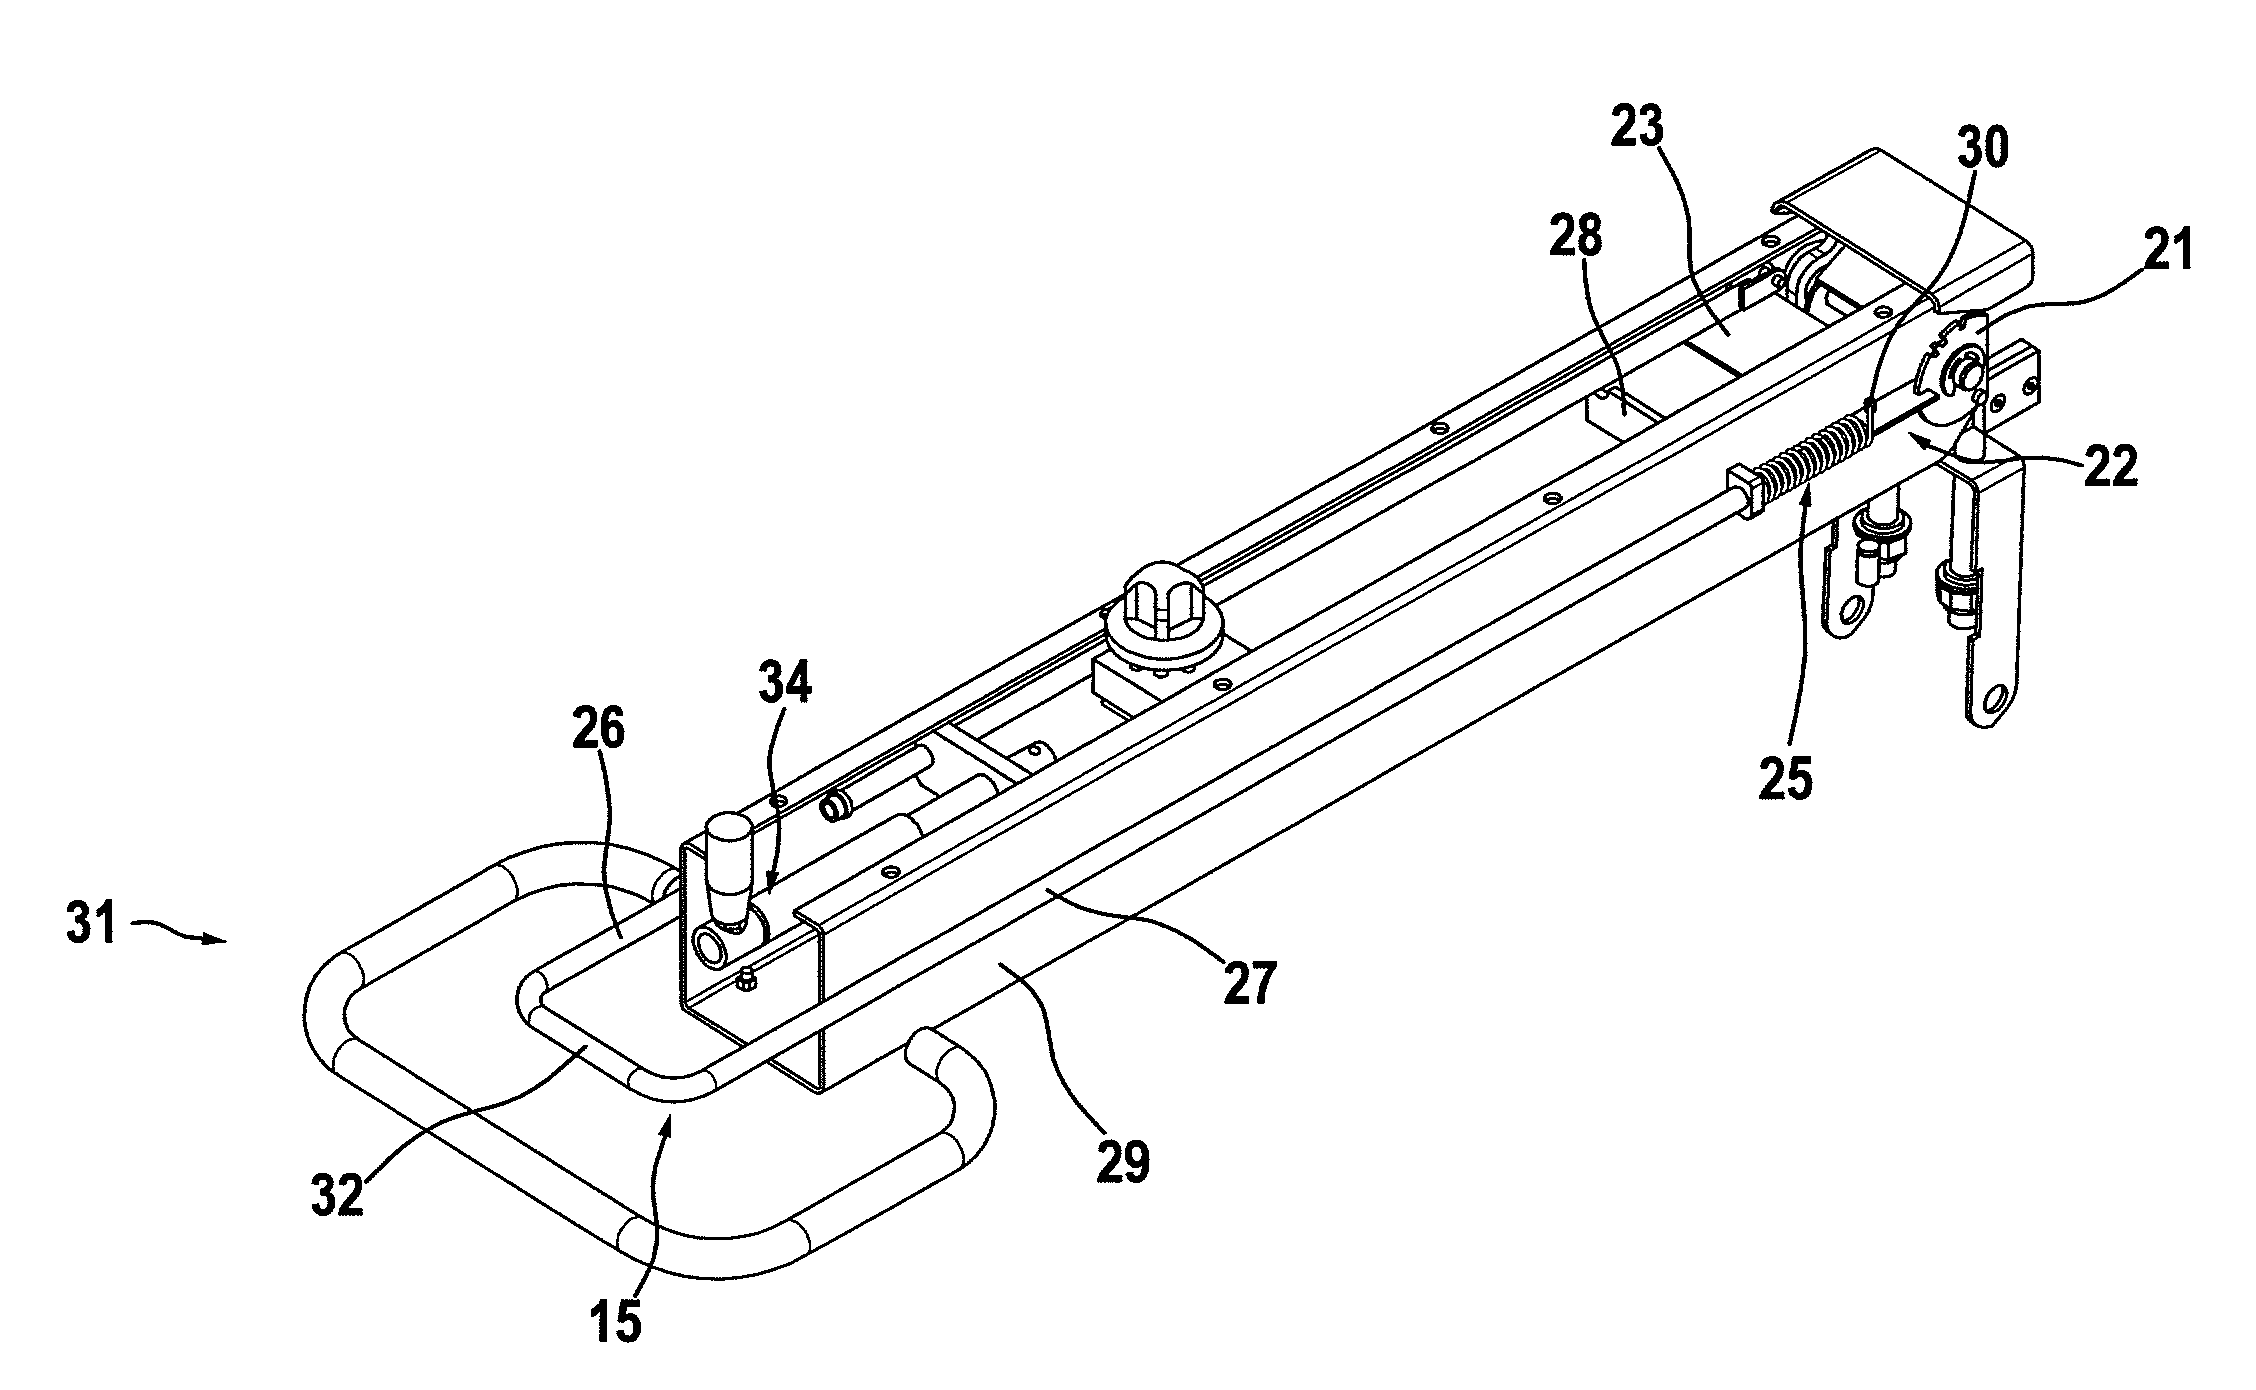 Centre arm for holding an upper contact grilling or roasting plate as well as contact grilling or roasting devices with such a centre arm